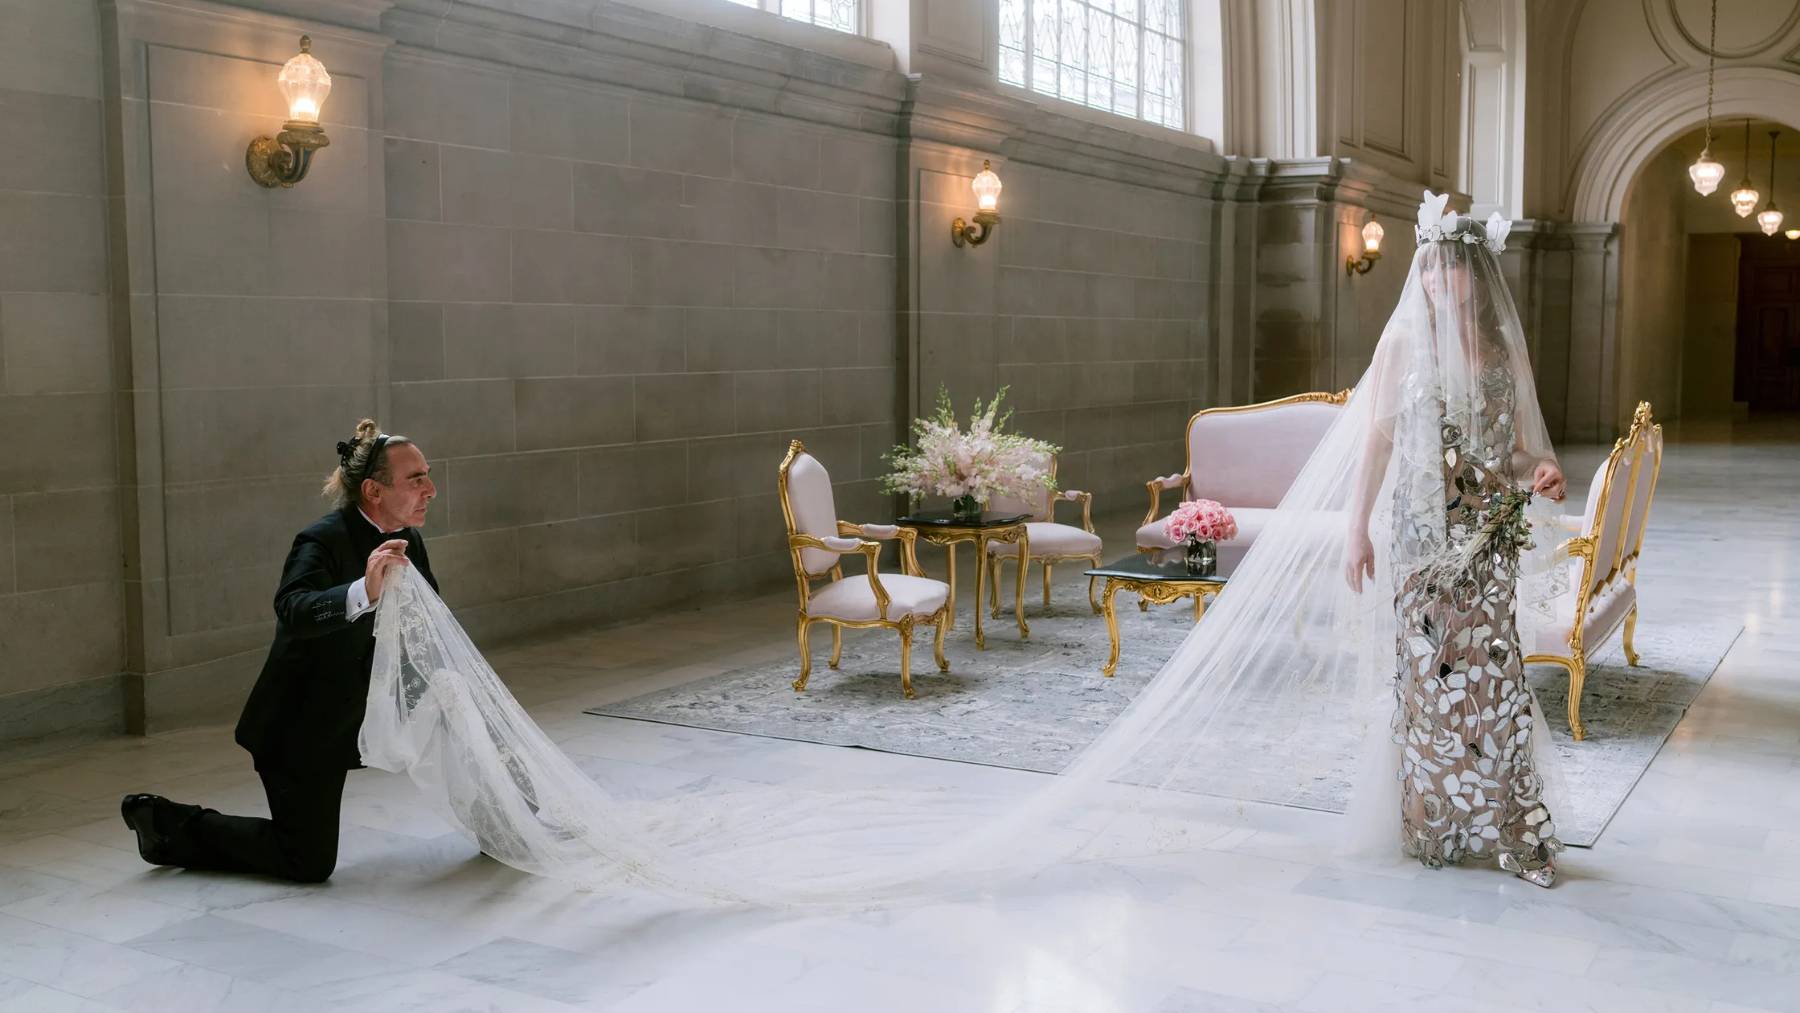 The wedding of Ivy Getty was a "turning point" for Vogue's wedding coverage, said Vogue.com editor Chioma Nnadi.